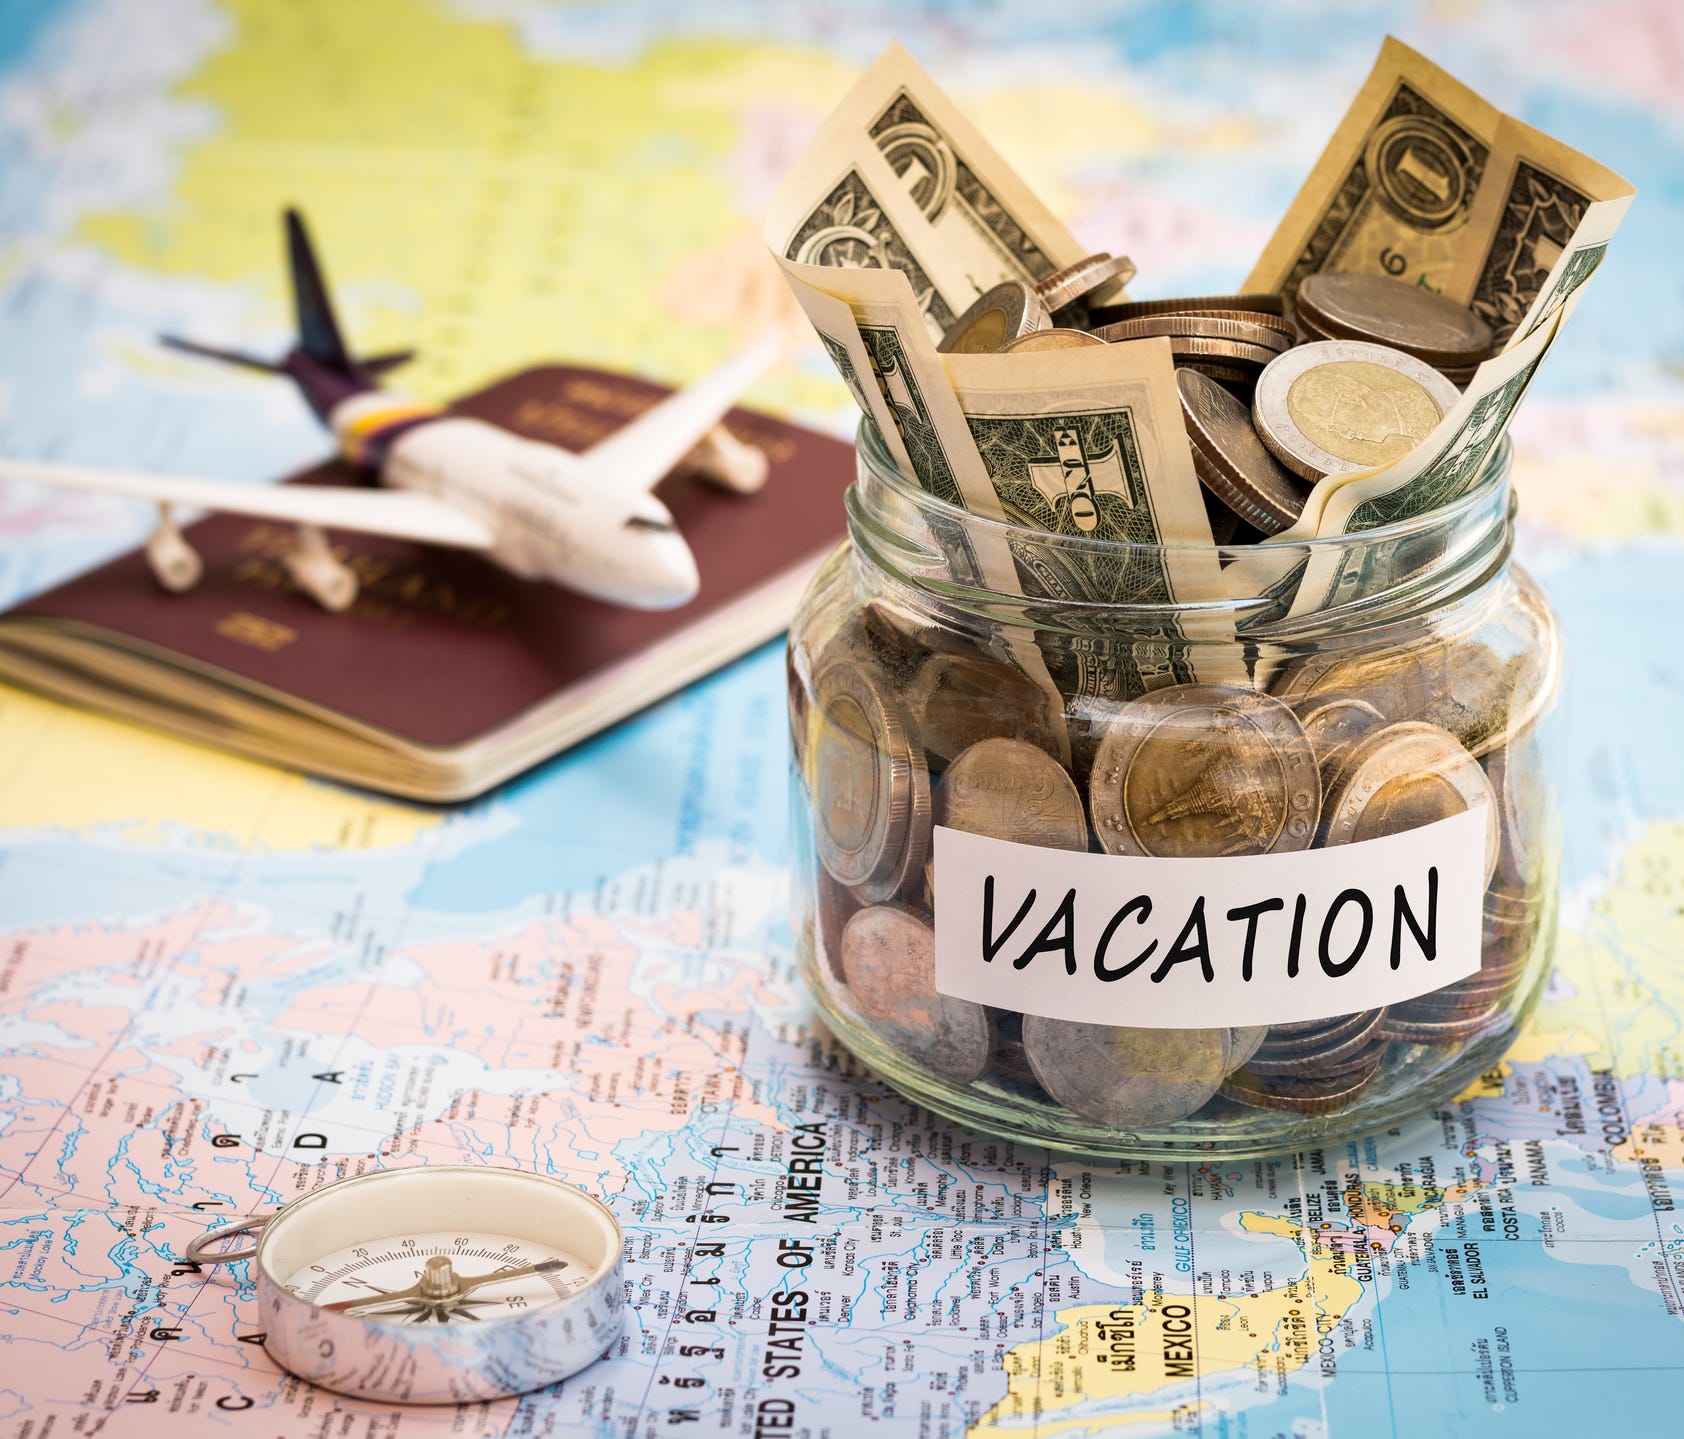 Know what you'll need to spend. Do your research ahead of time, not only on the cost of travel and accommodations but also your activities and the meals you'll eat.